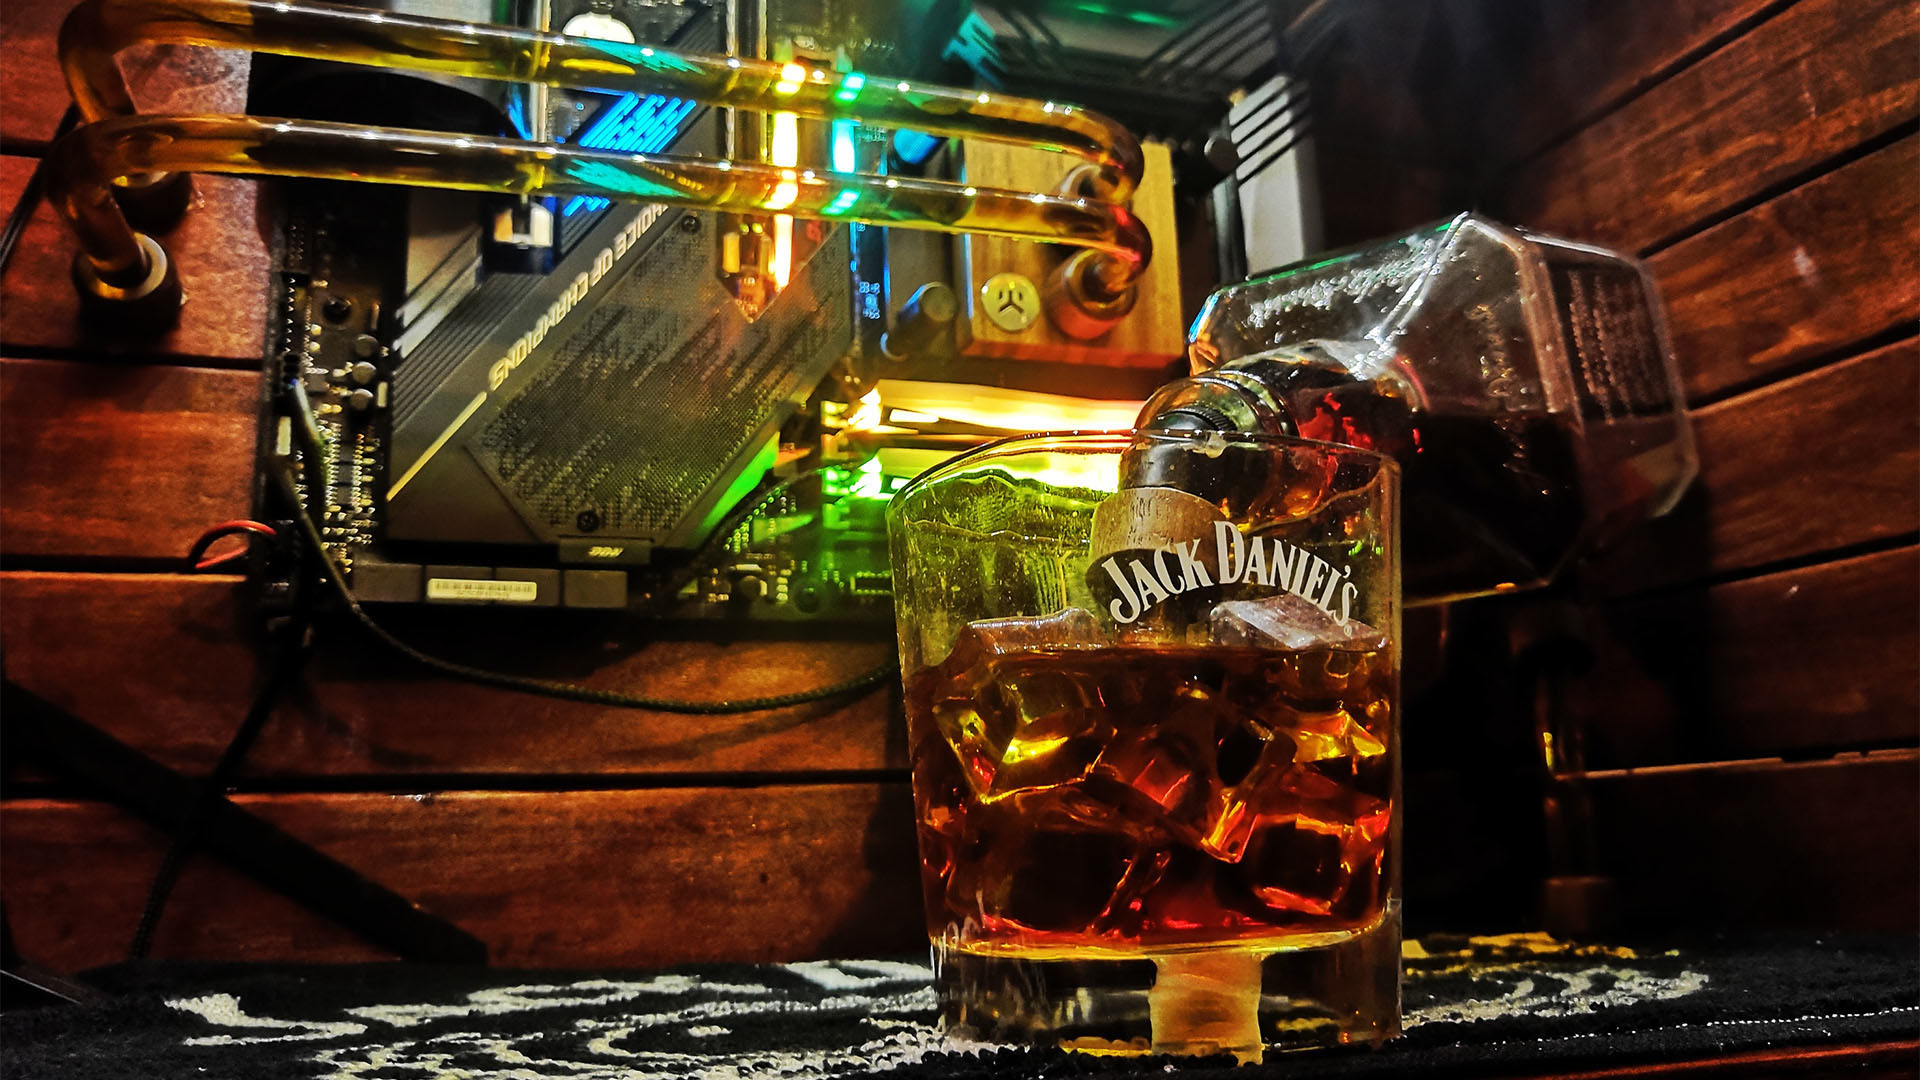 The coolant of the Jack Daniel's gaming PC pours into a Jack Daniel's glass inside the PC